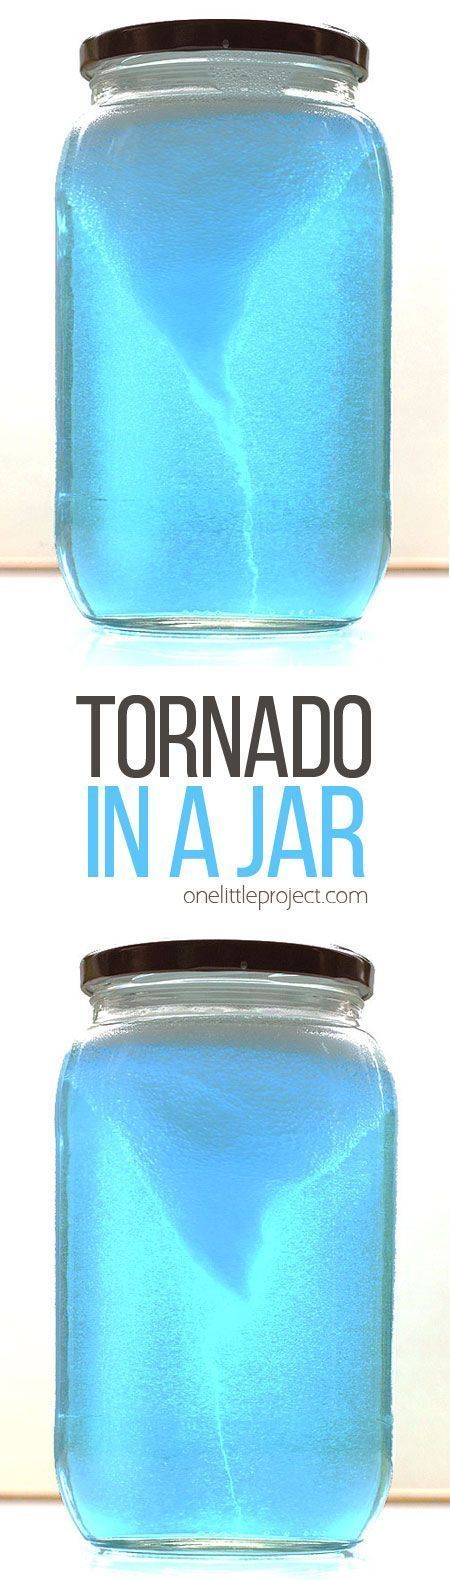 This tornado in a jar experiment is crazy simple, but it’s SO COOL to watch! It takes less than five minutes to put together.